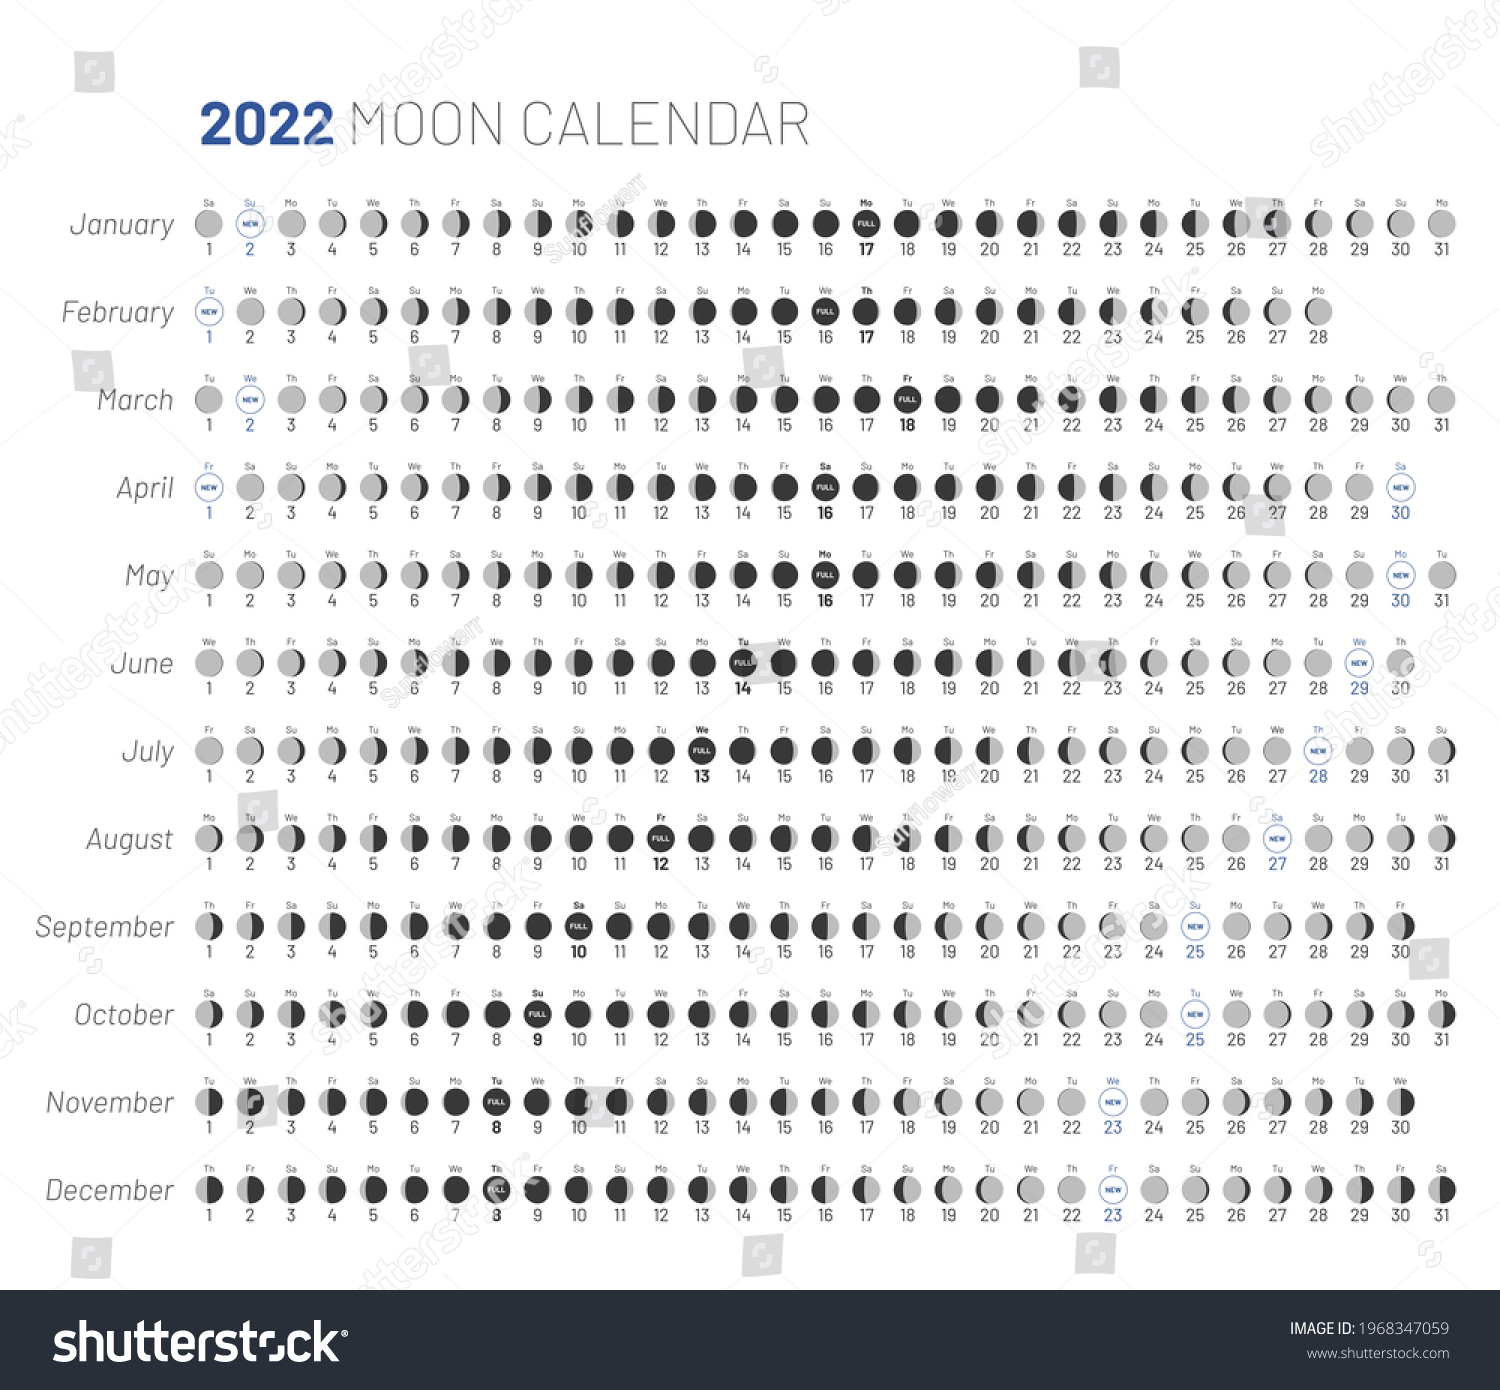 Lunar Schedule 2022 Moon Lunar Calendar Monthly Cycle Planner Stock Vector (Royalty Free)  1968347059